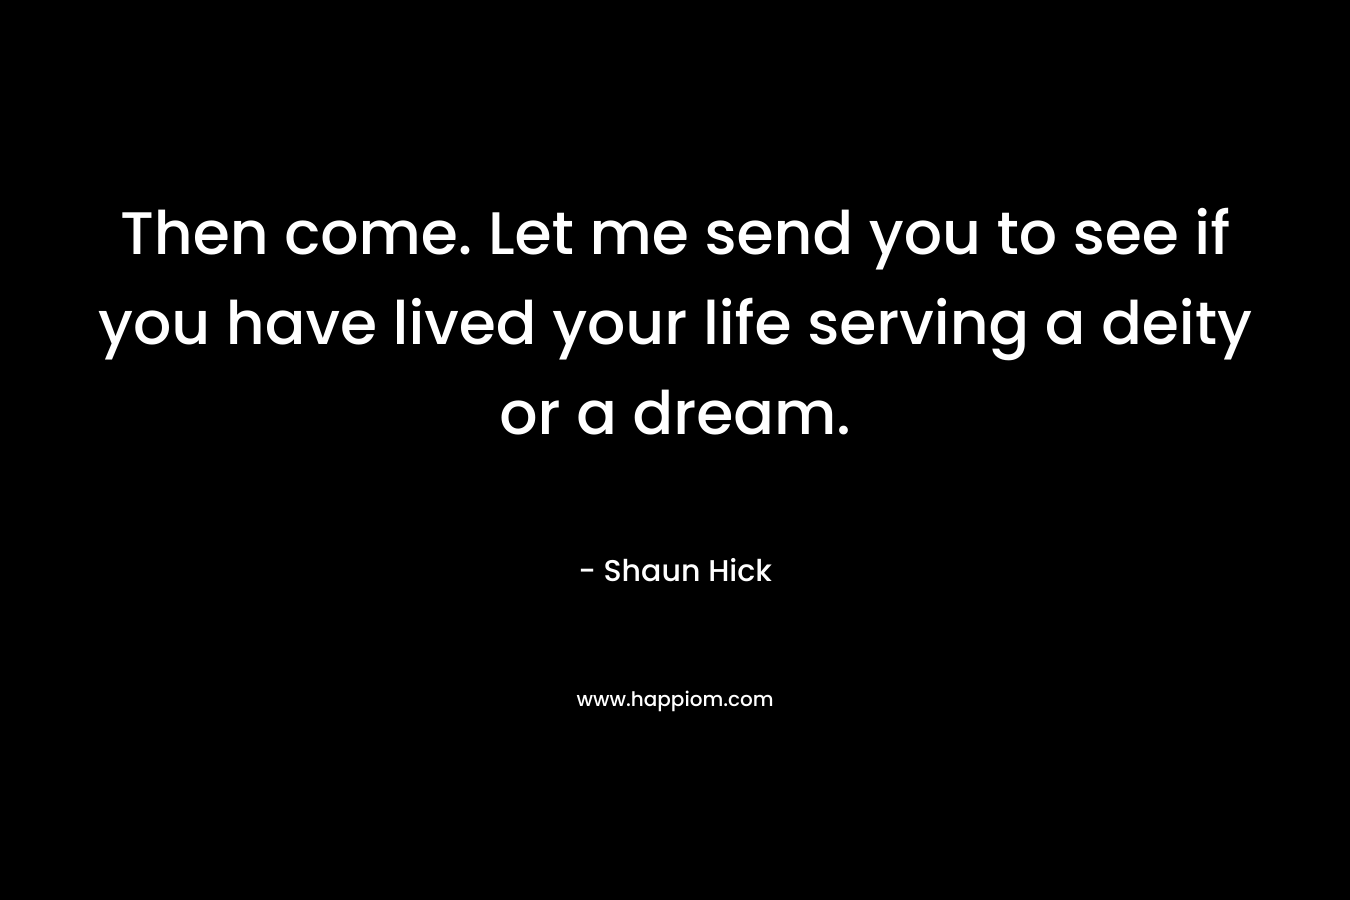 Then come. Let me send you to see if you have lived your life serving a deity or a dream.